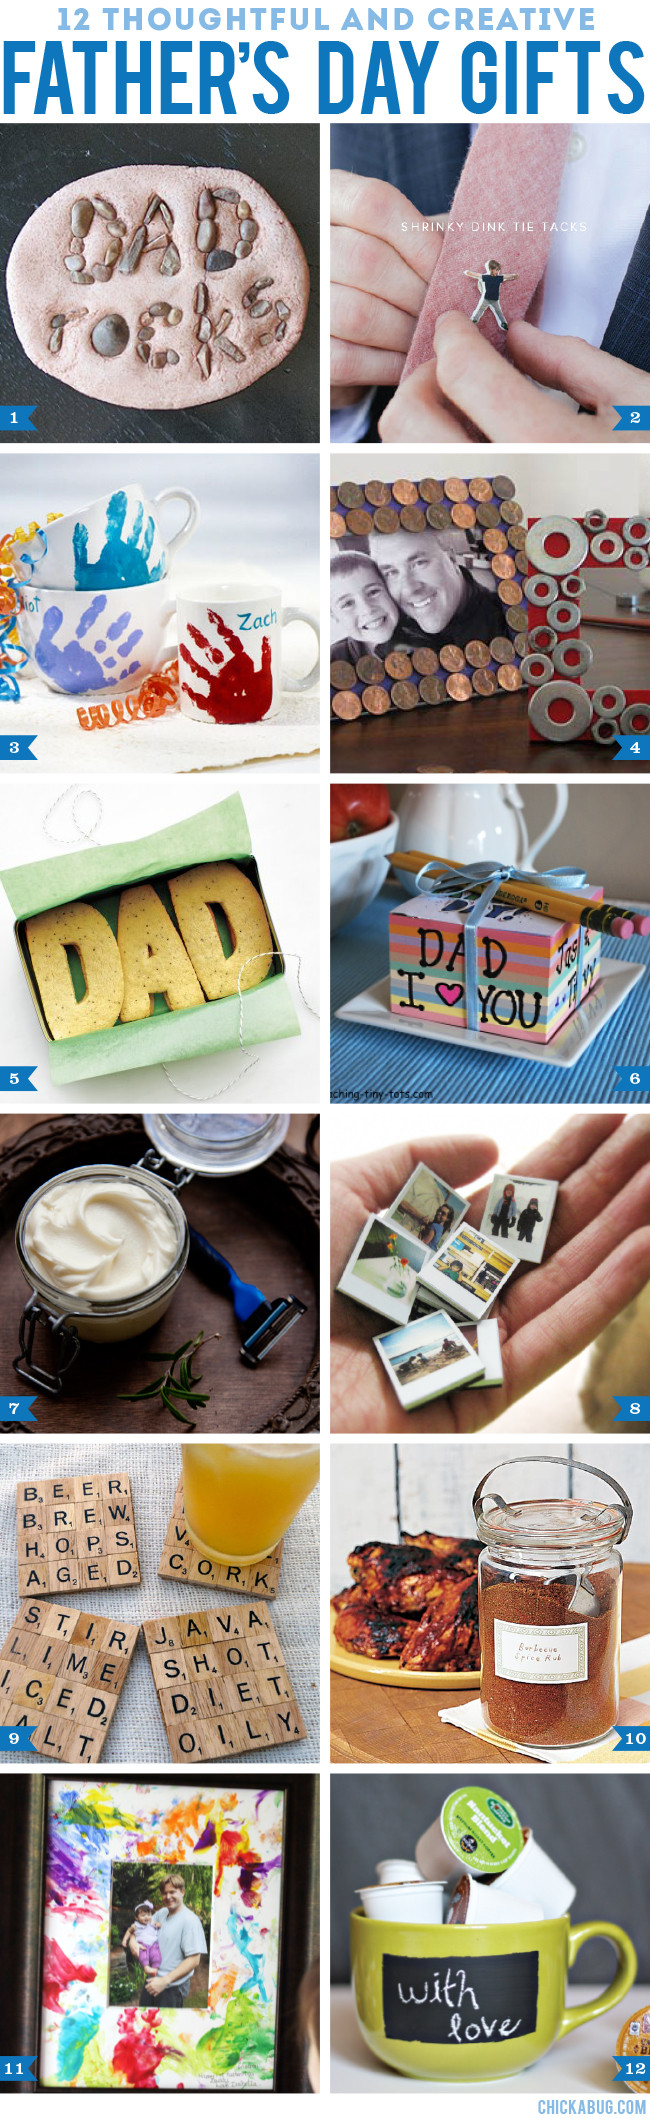 DIY Fathers Gifts
 12 awesome DIY Father s Day ts